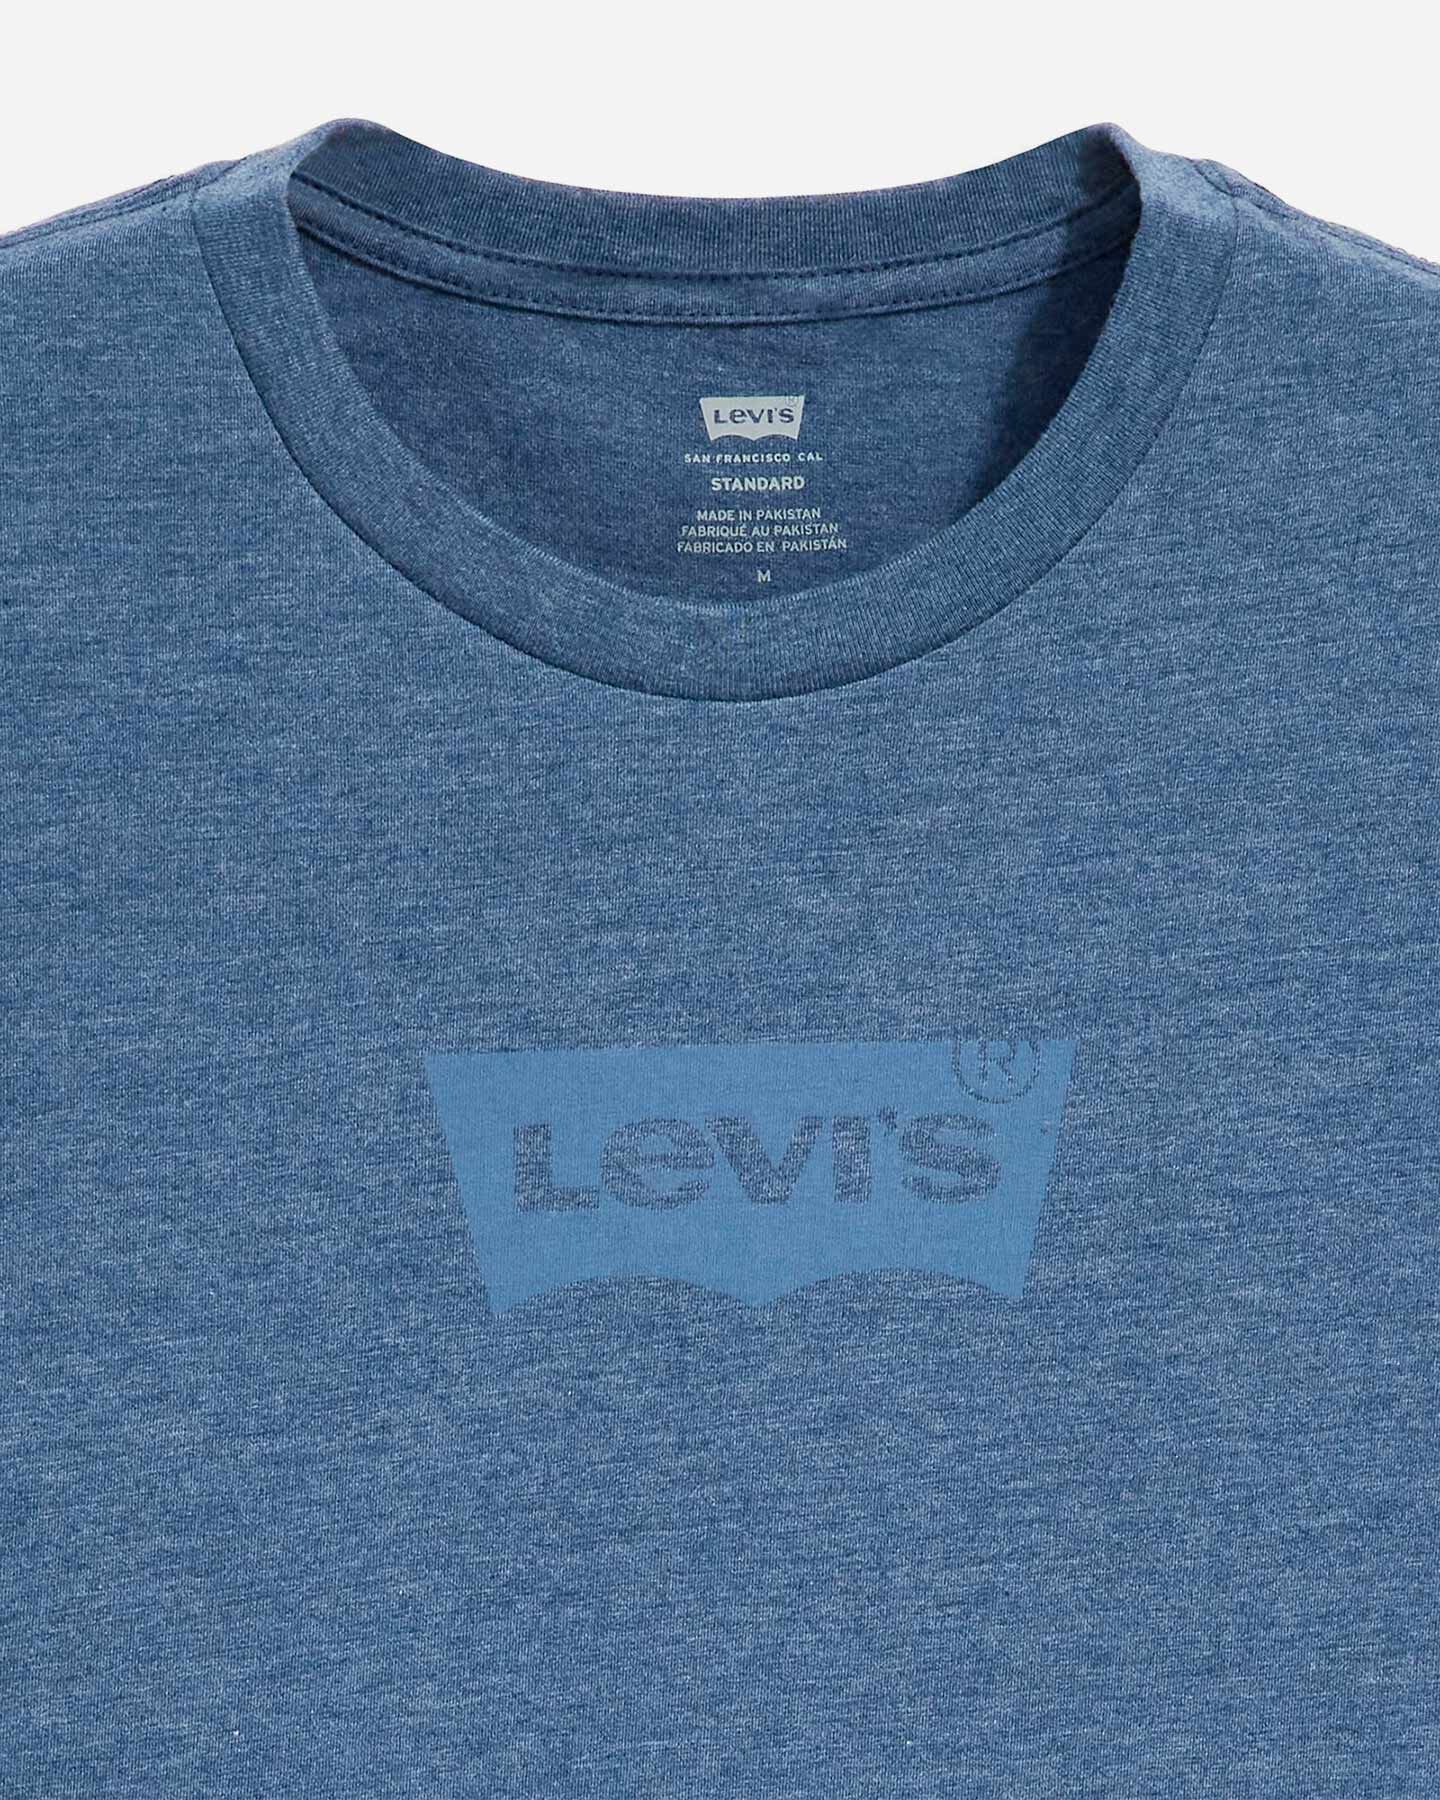  T-Shirt LEVI'S MODAL M S4131453|1493|S scatto 3